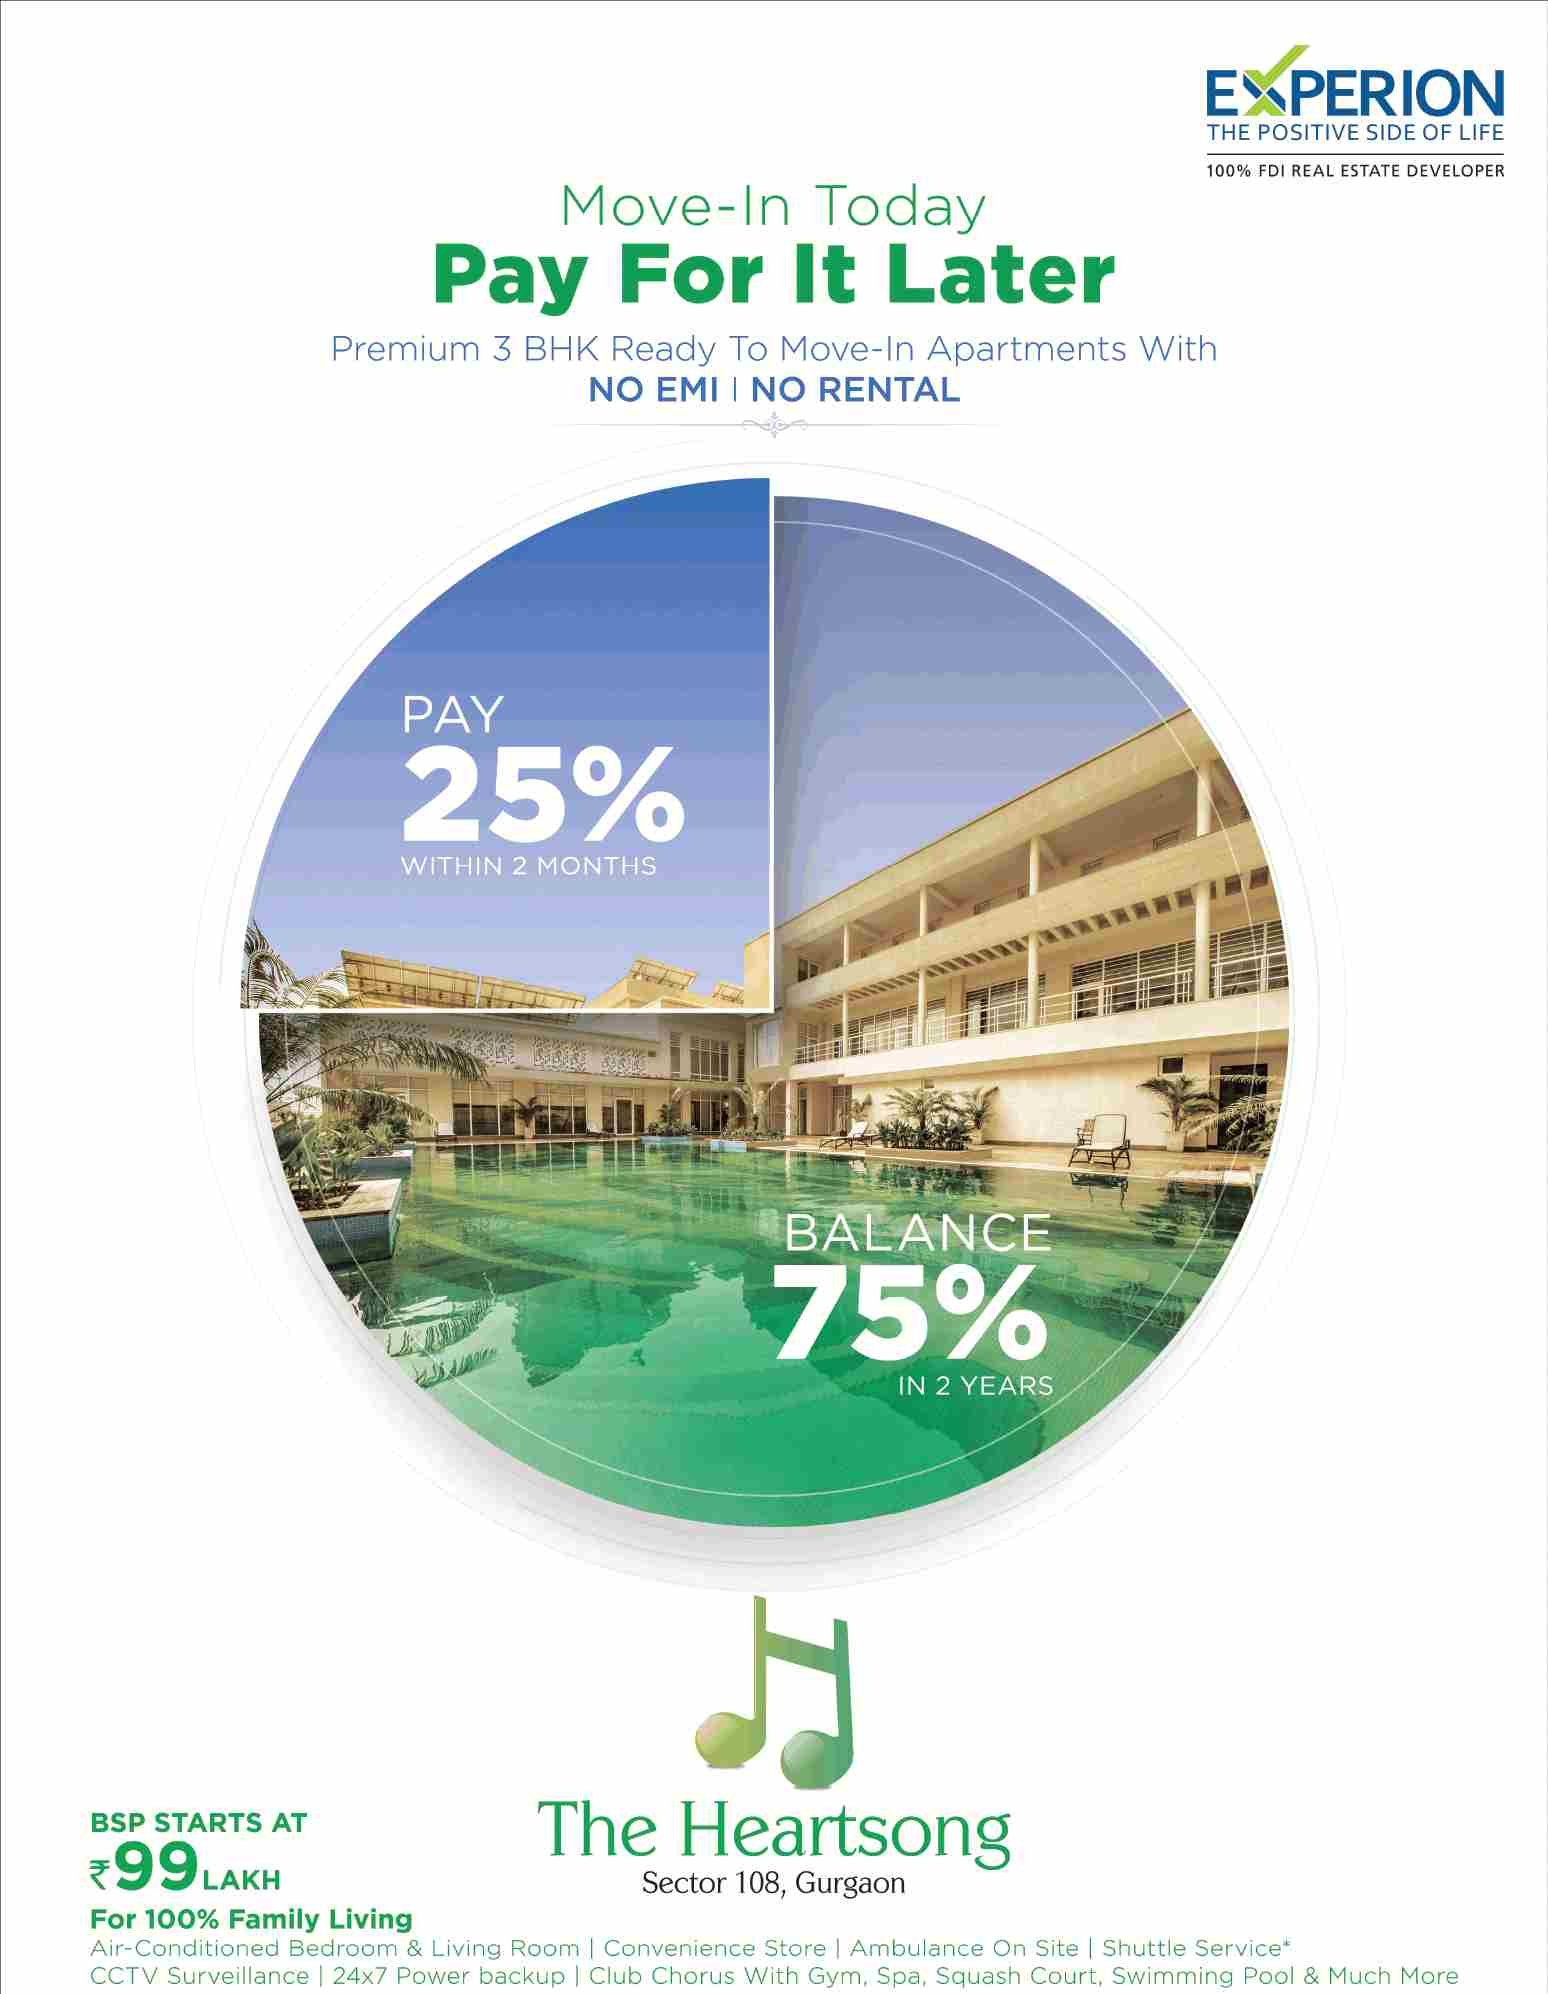 Pay 25% in 2 months and balance 75% in 2 years at Experion The Heartsong in Gurgaon Update